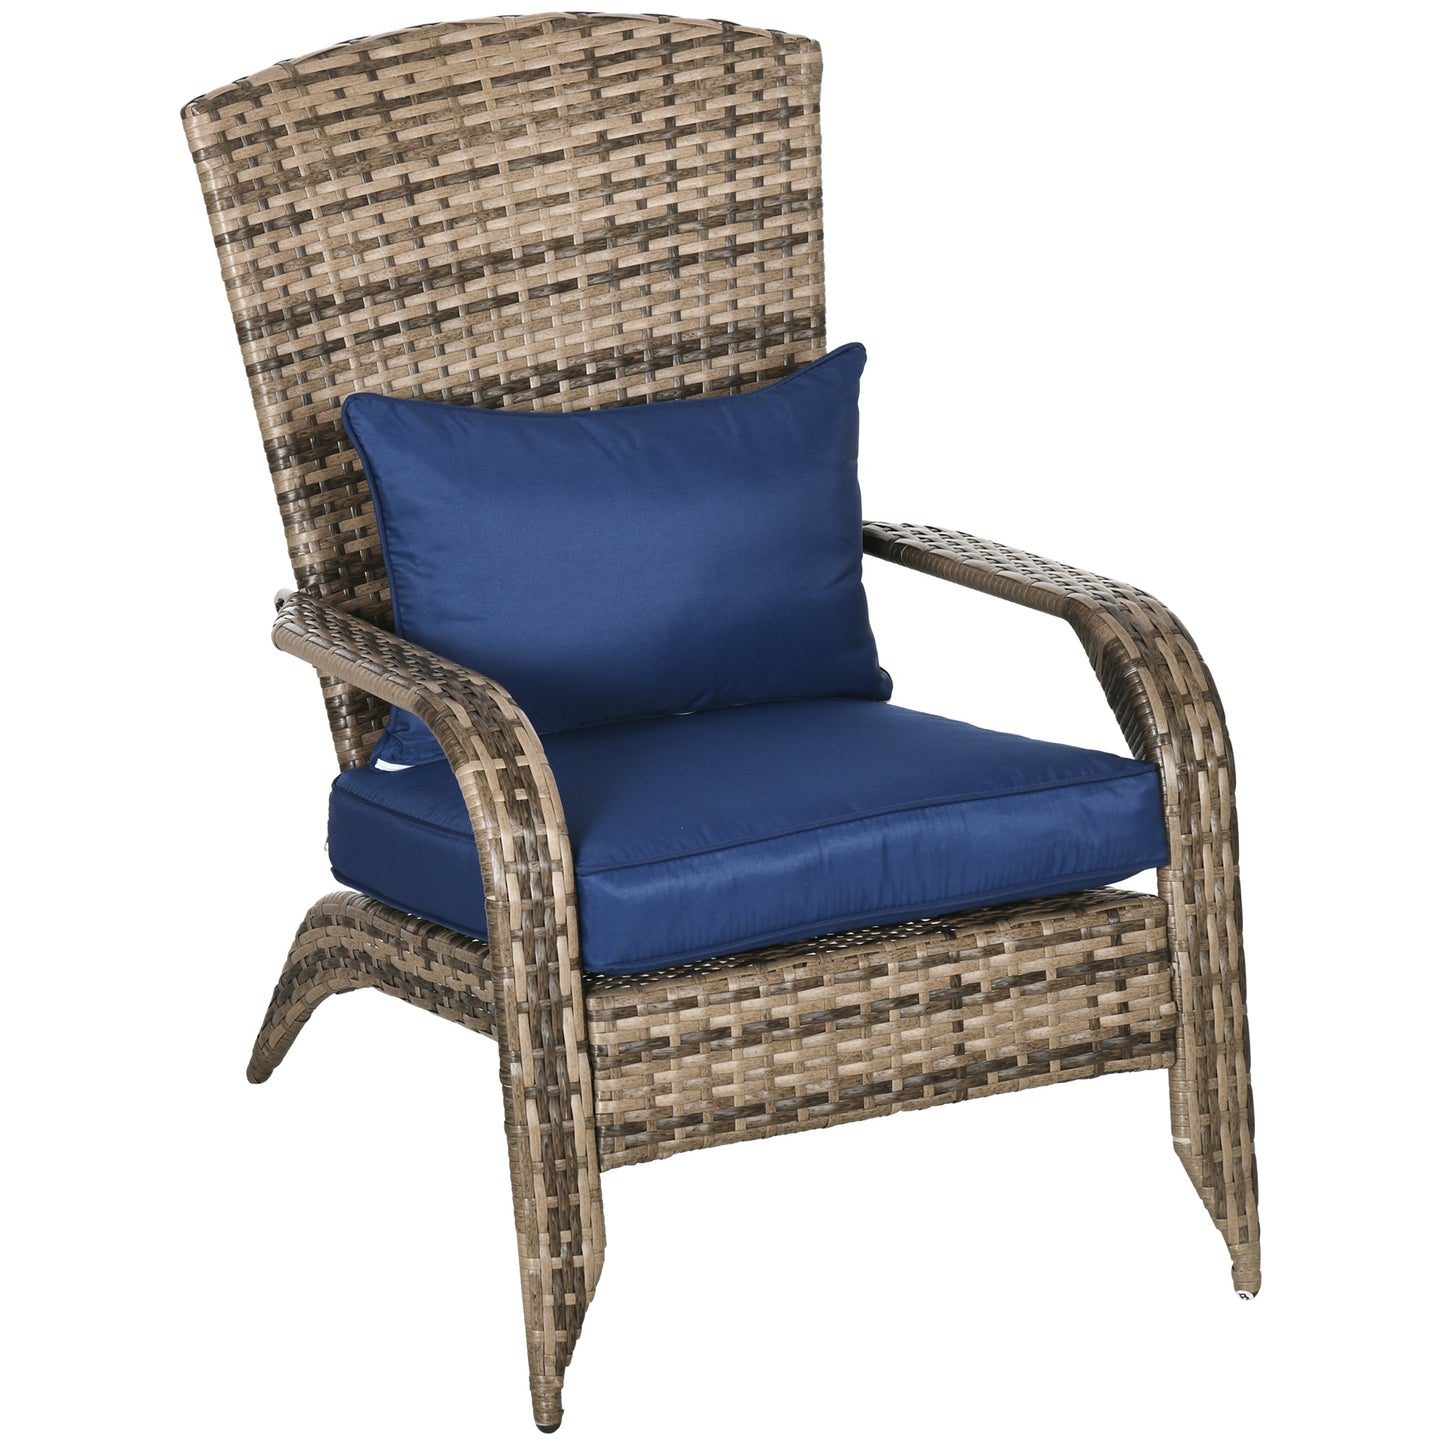 AOSOM-Patio Wicker Adirondack Chair, Outdoor All-Weather Rattan Fire Pit Chair, Soft Cushions, Tall Curved Backrest and Armrests - Dark Blue - Outdoor Style Company